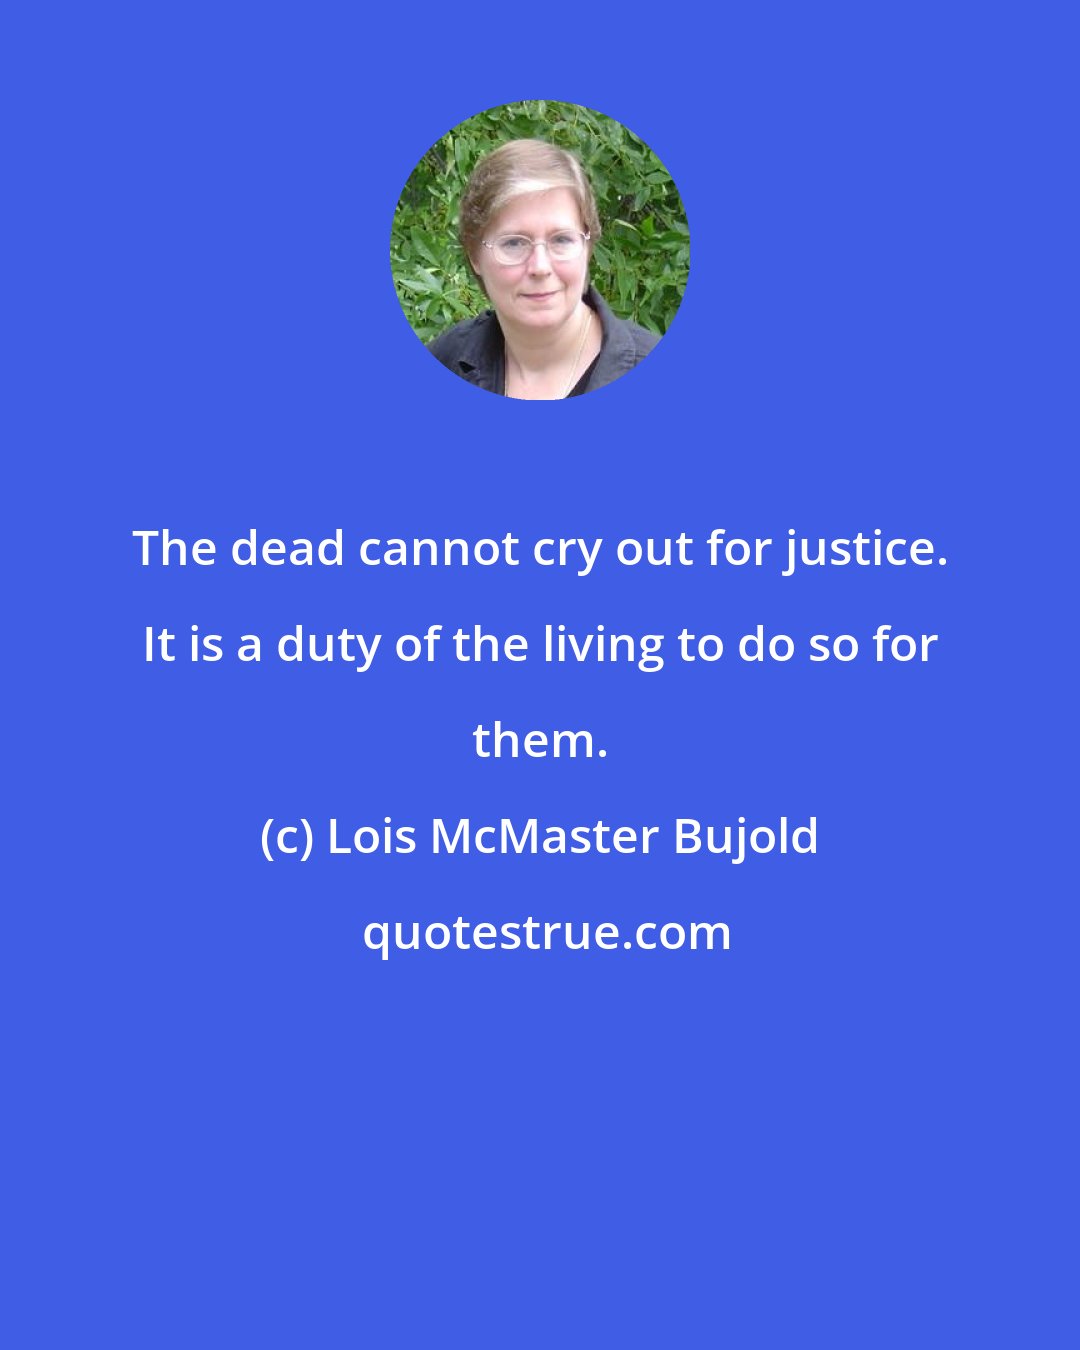 Lois McMaster Bujold: The dead cannot cry out for justice. It is a duty of the living to do so for them.